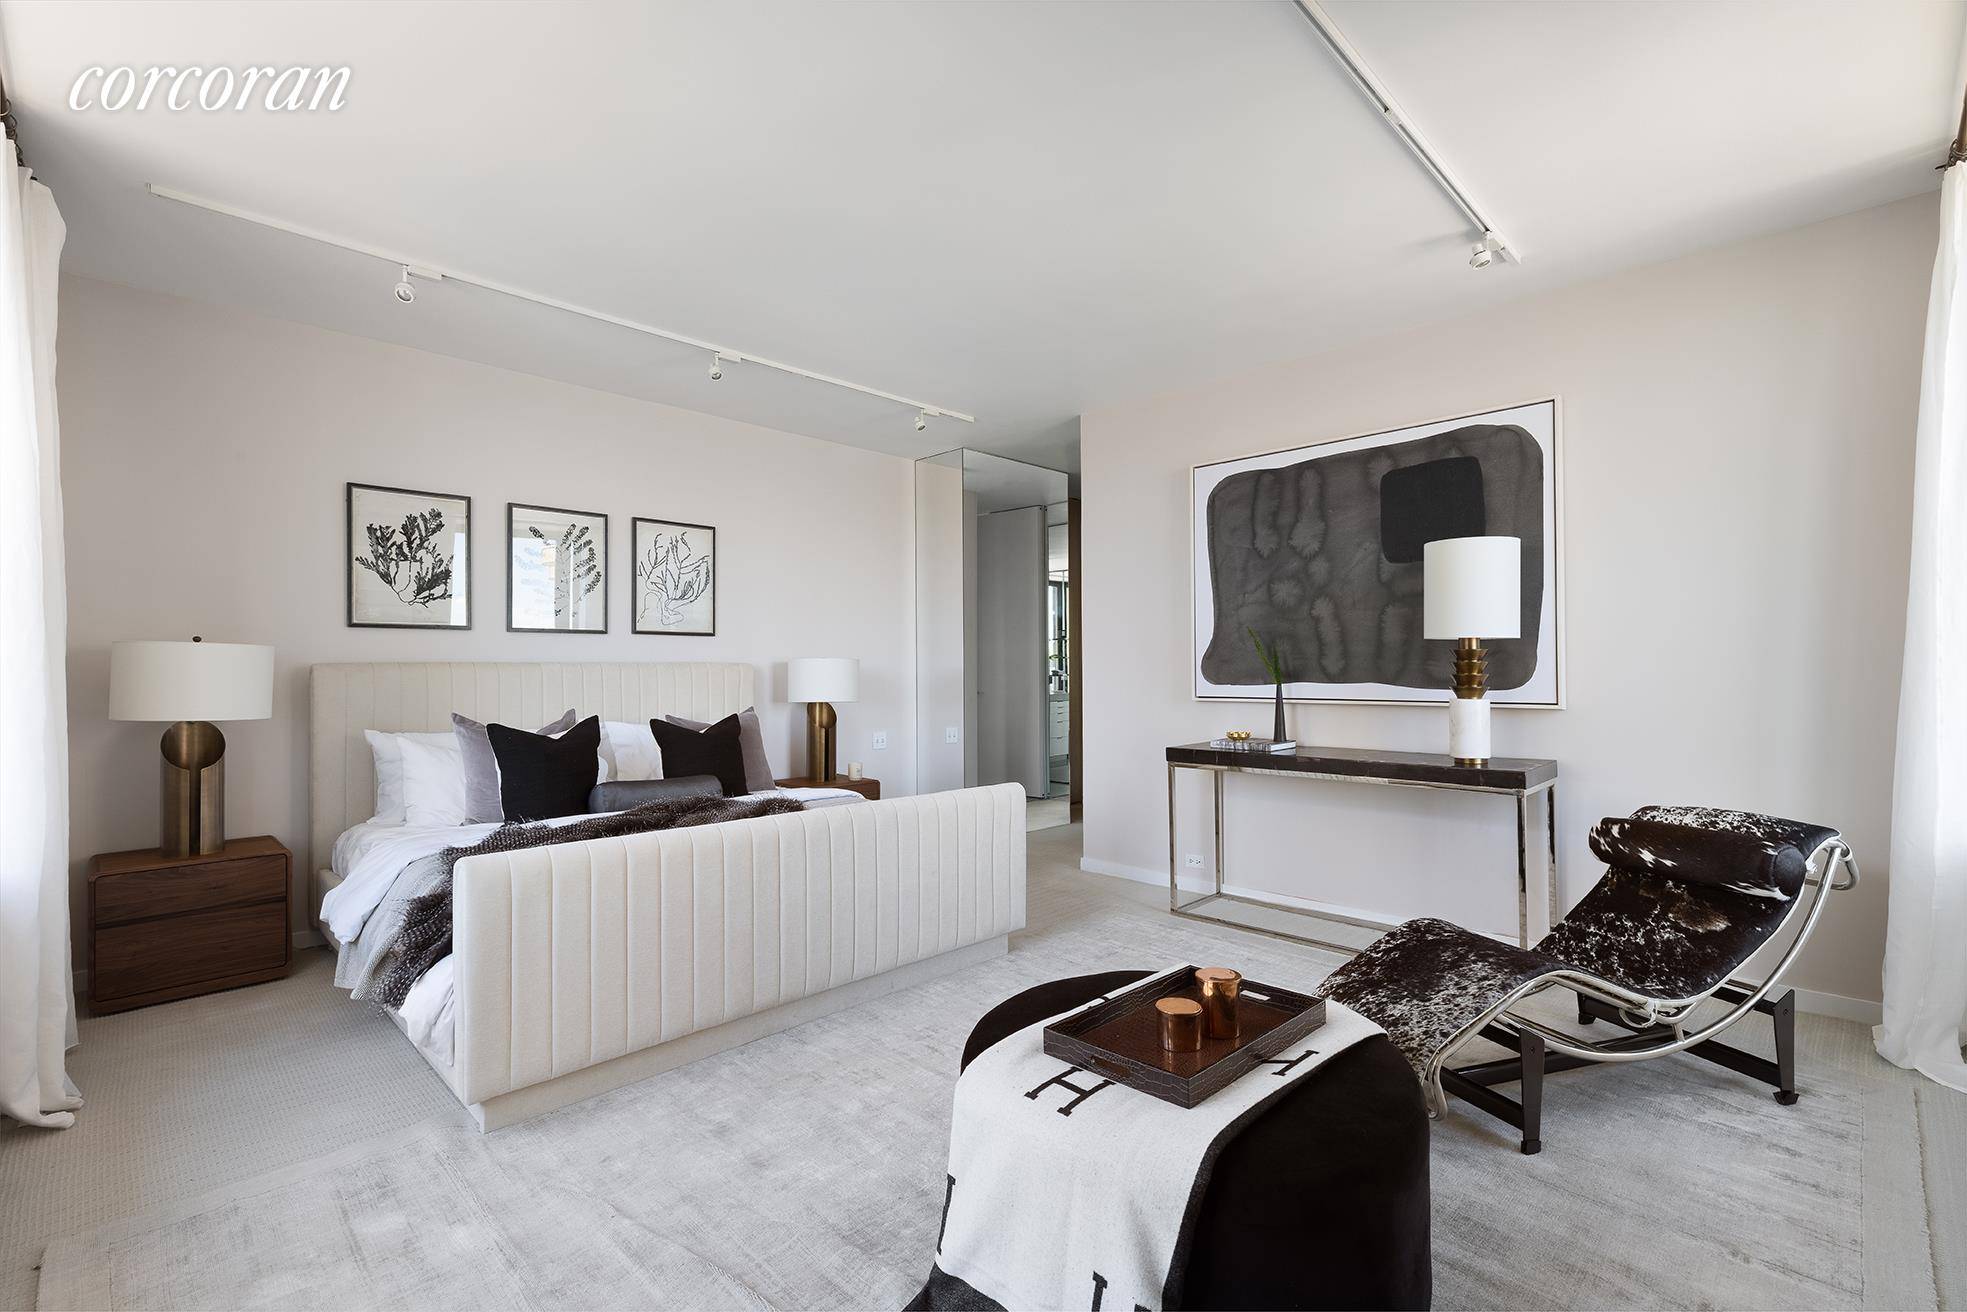 795 Fifth AvenueResidence 2311Three Bedrooms Three BathsCorner Residence with Contemporary Design and Pre War Scale at The Pierre HotelLocated on a rare fully private co op floor at The Pierre ...